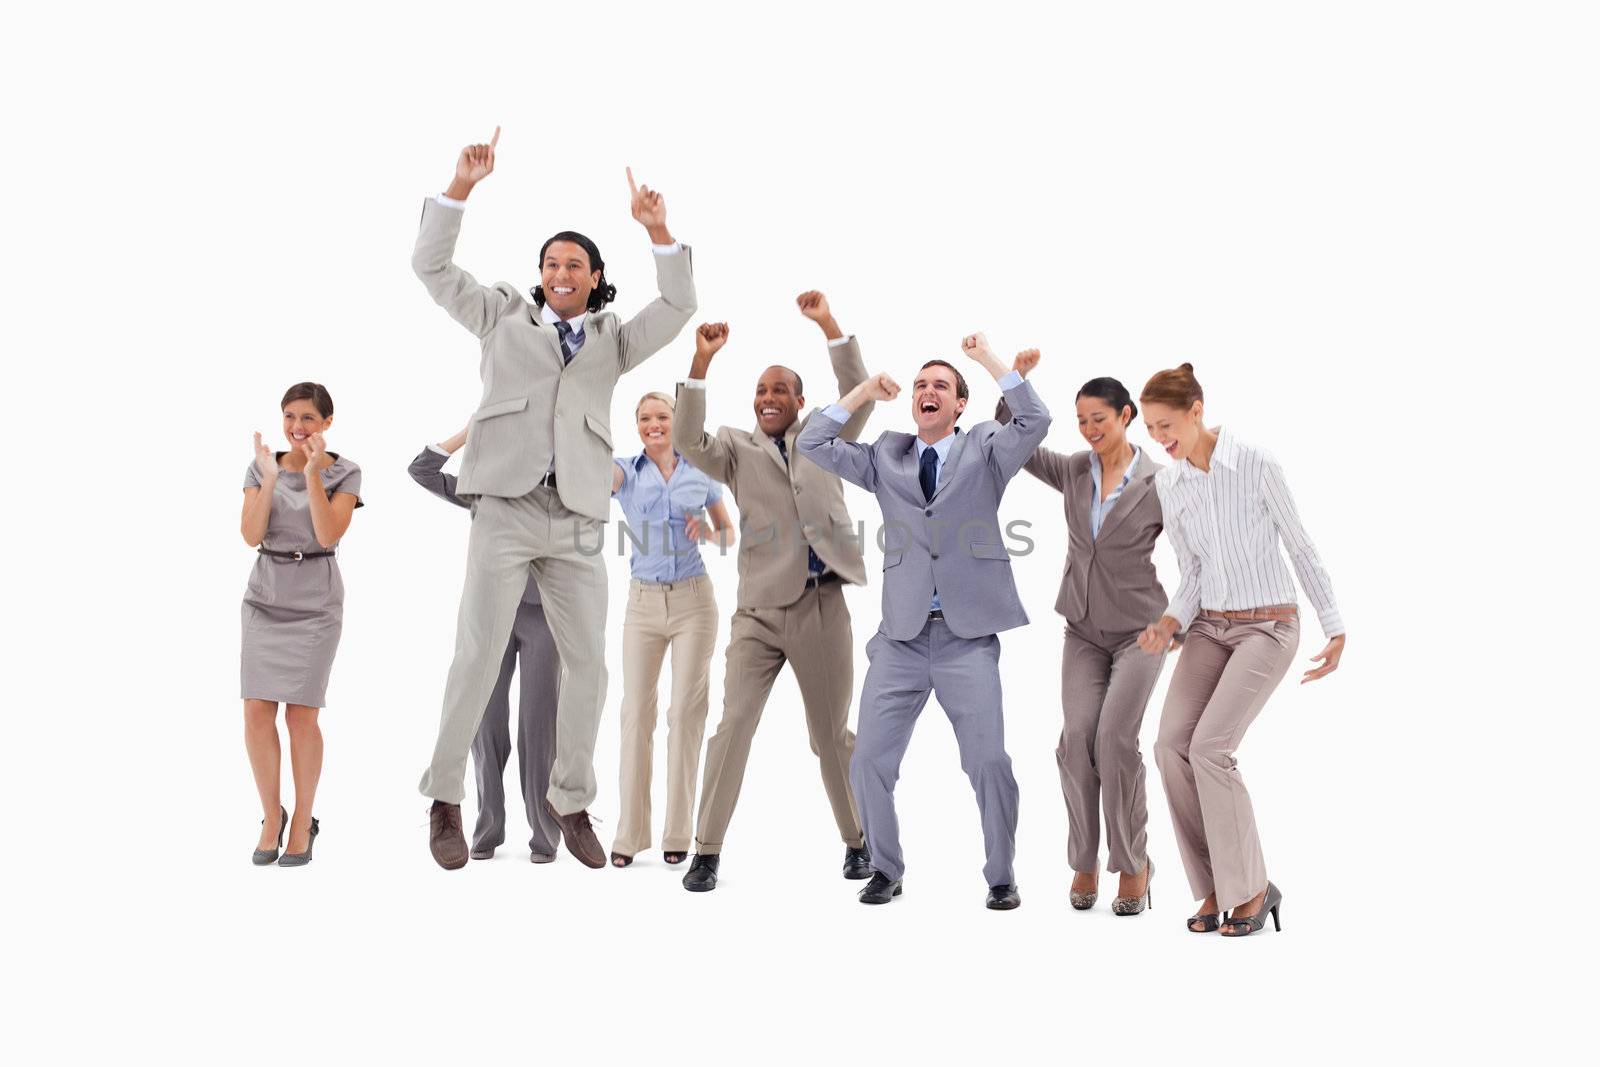 Very enthusiast business people jumping and raising their arms by Wavebreakmedia